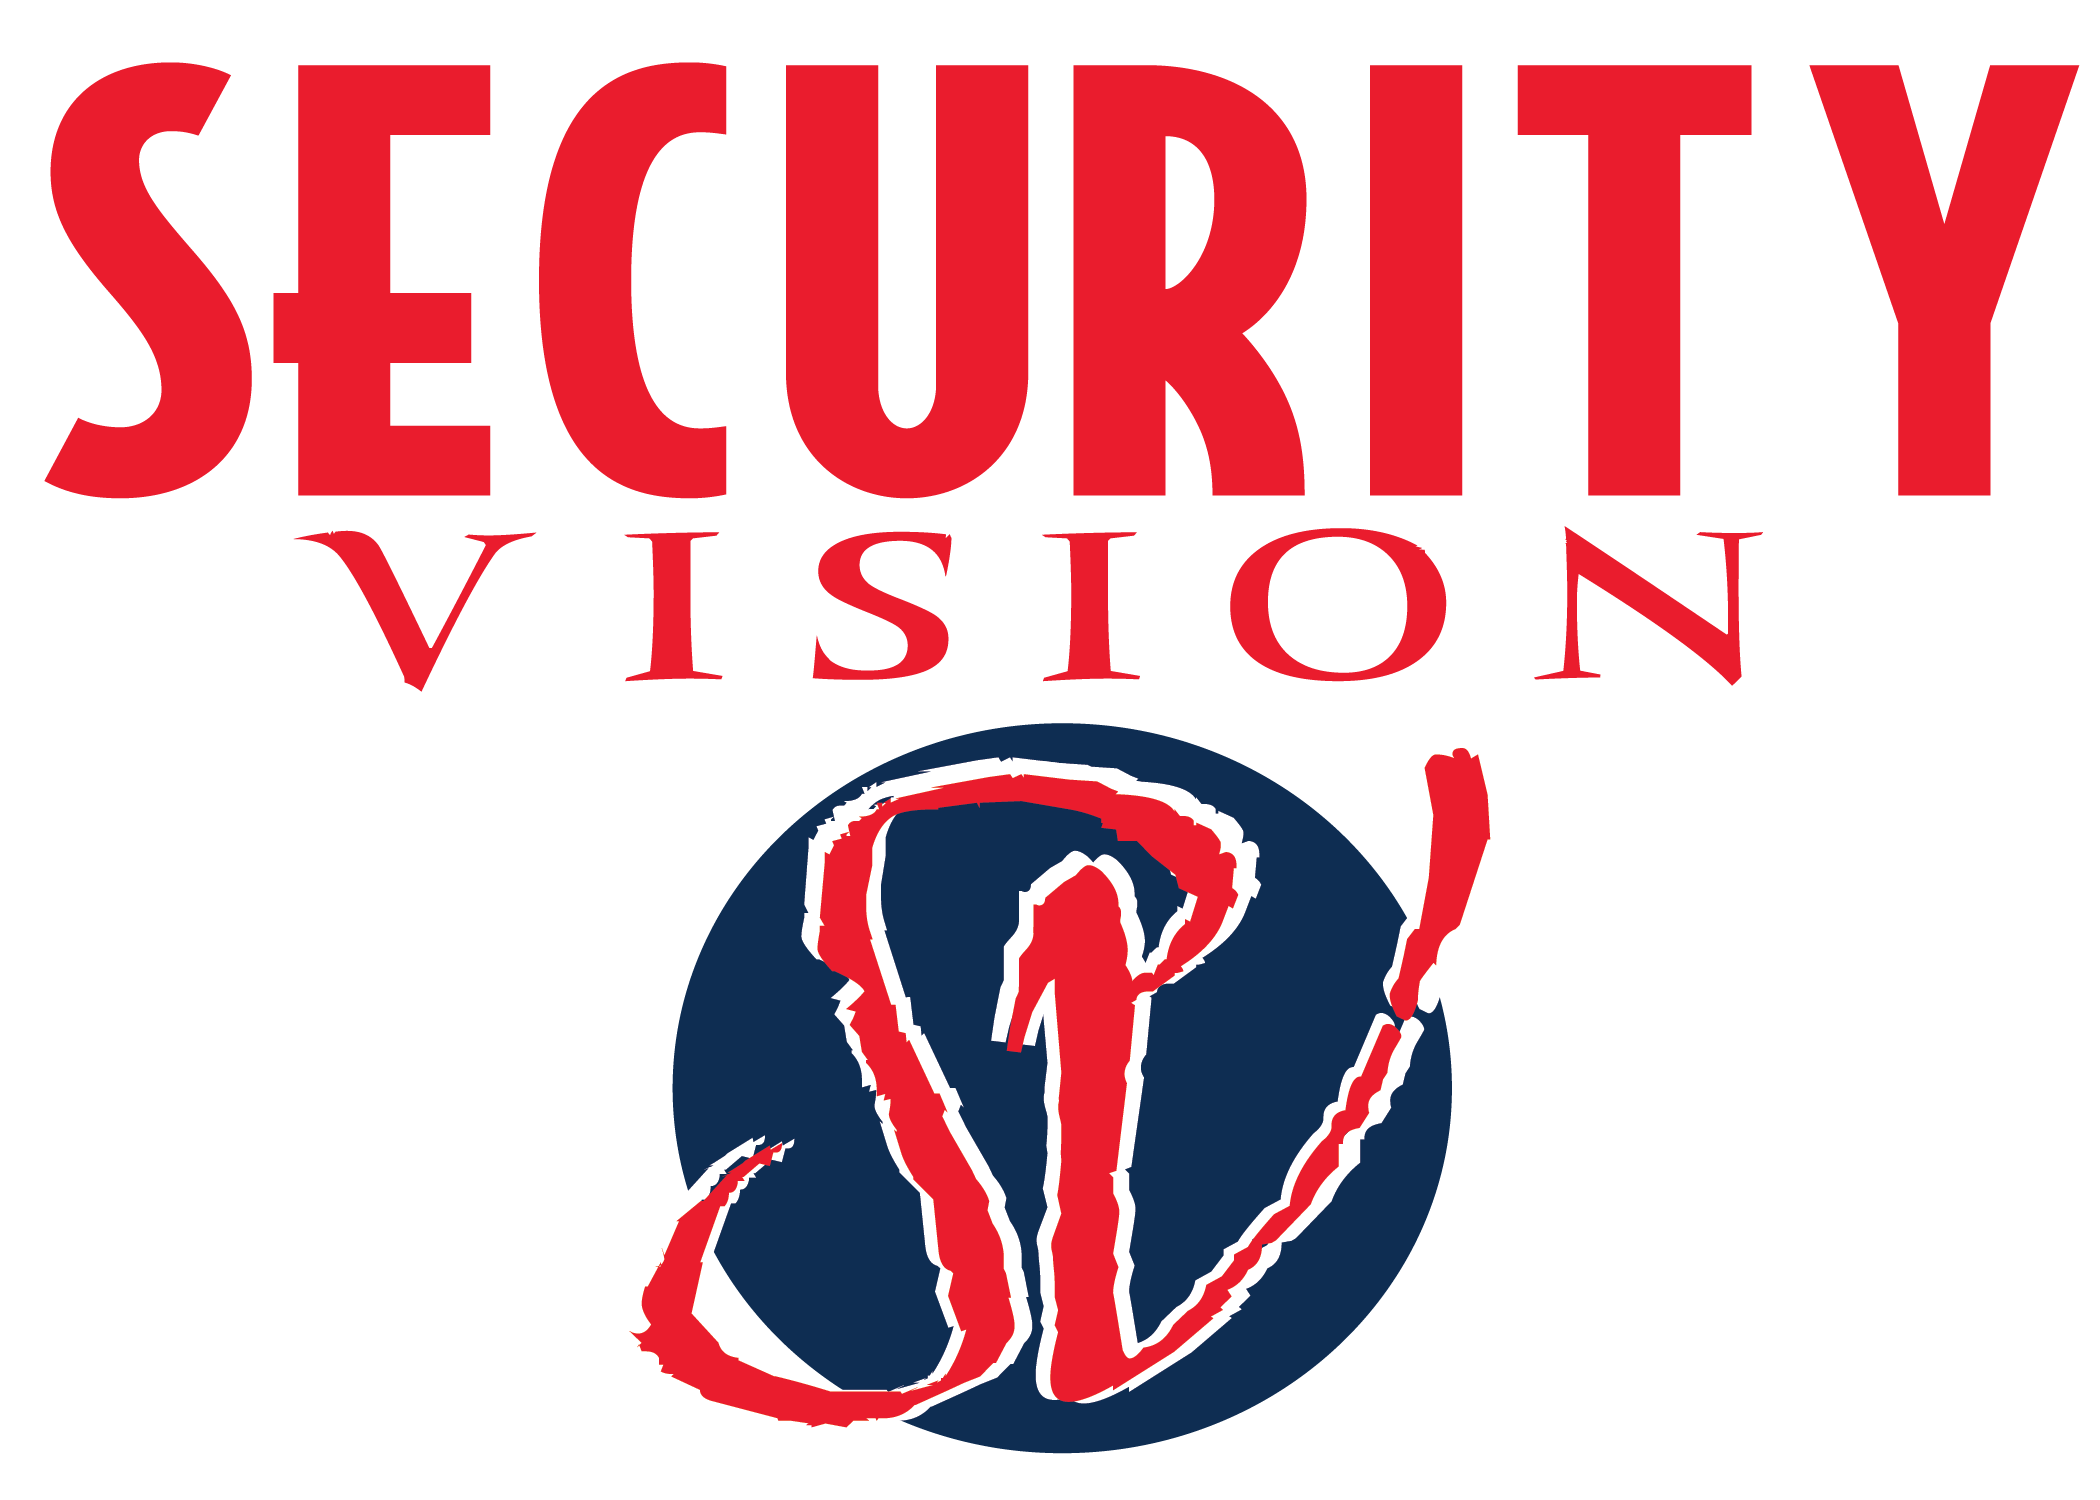 Security Vision